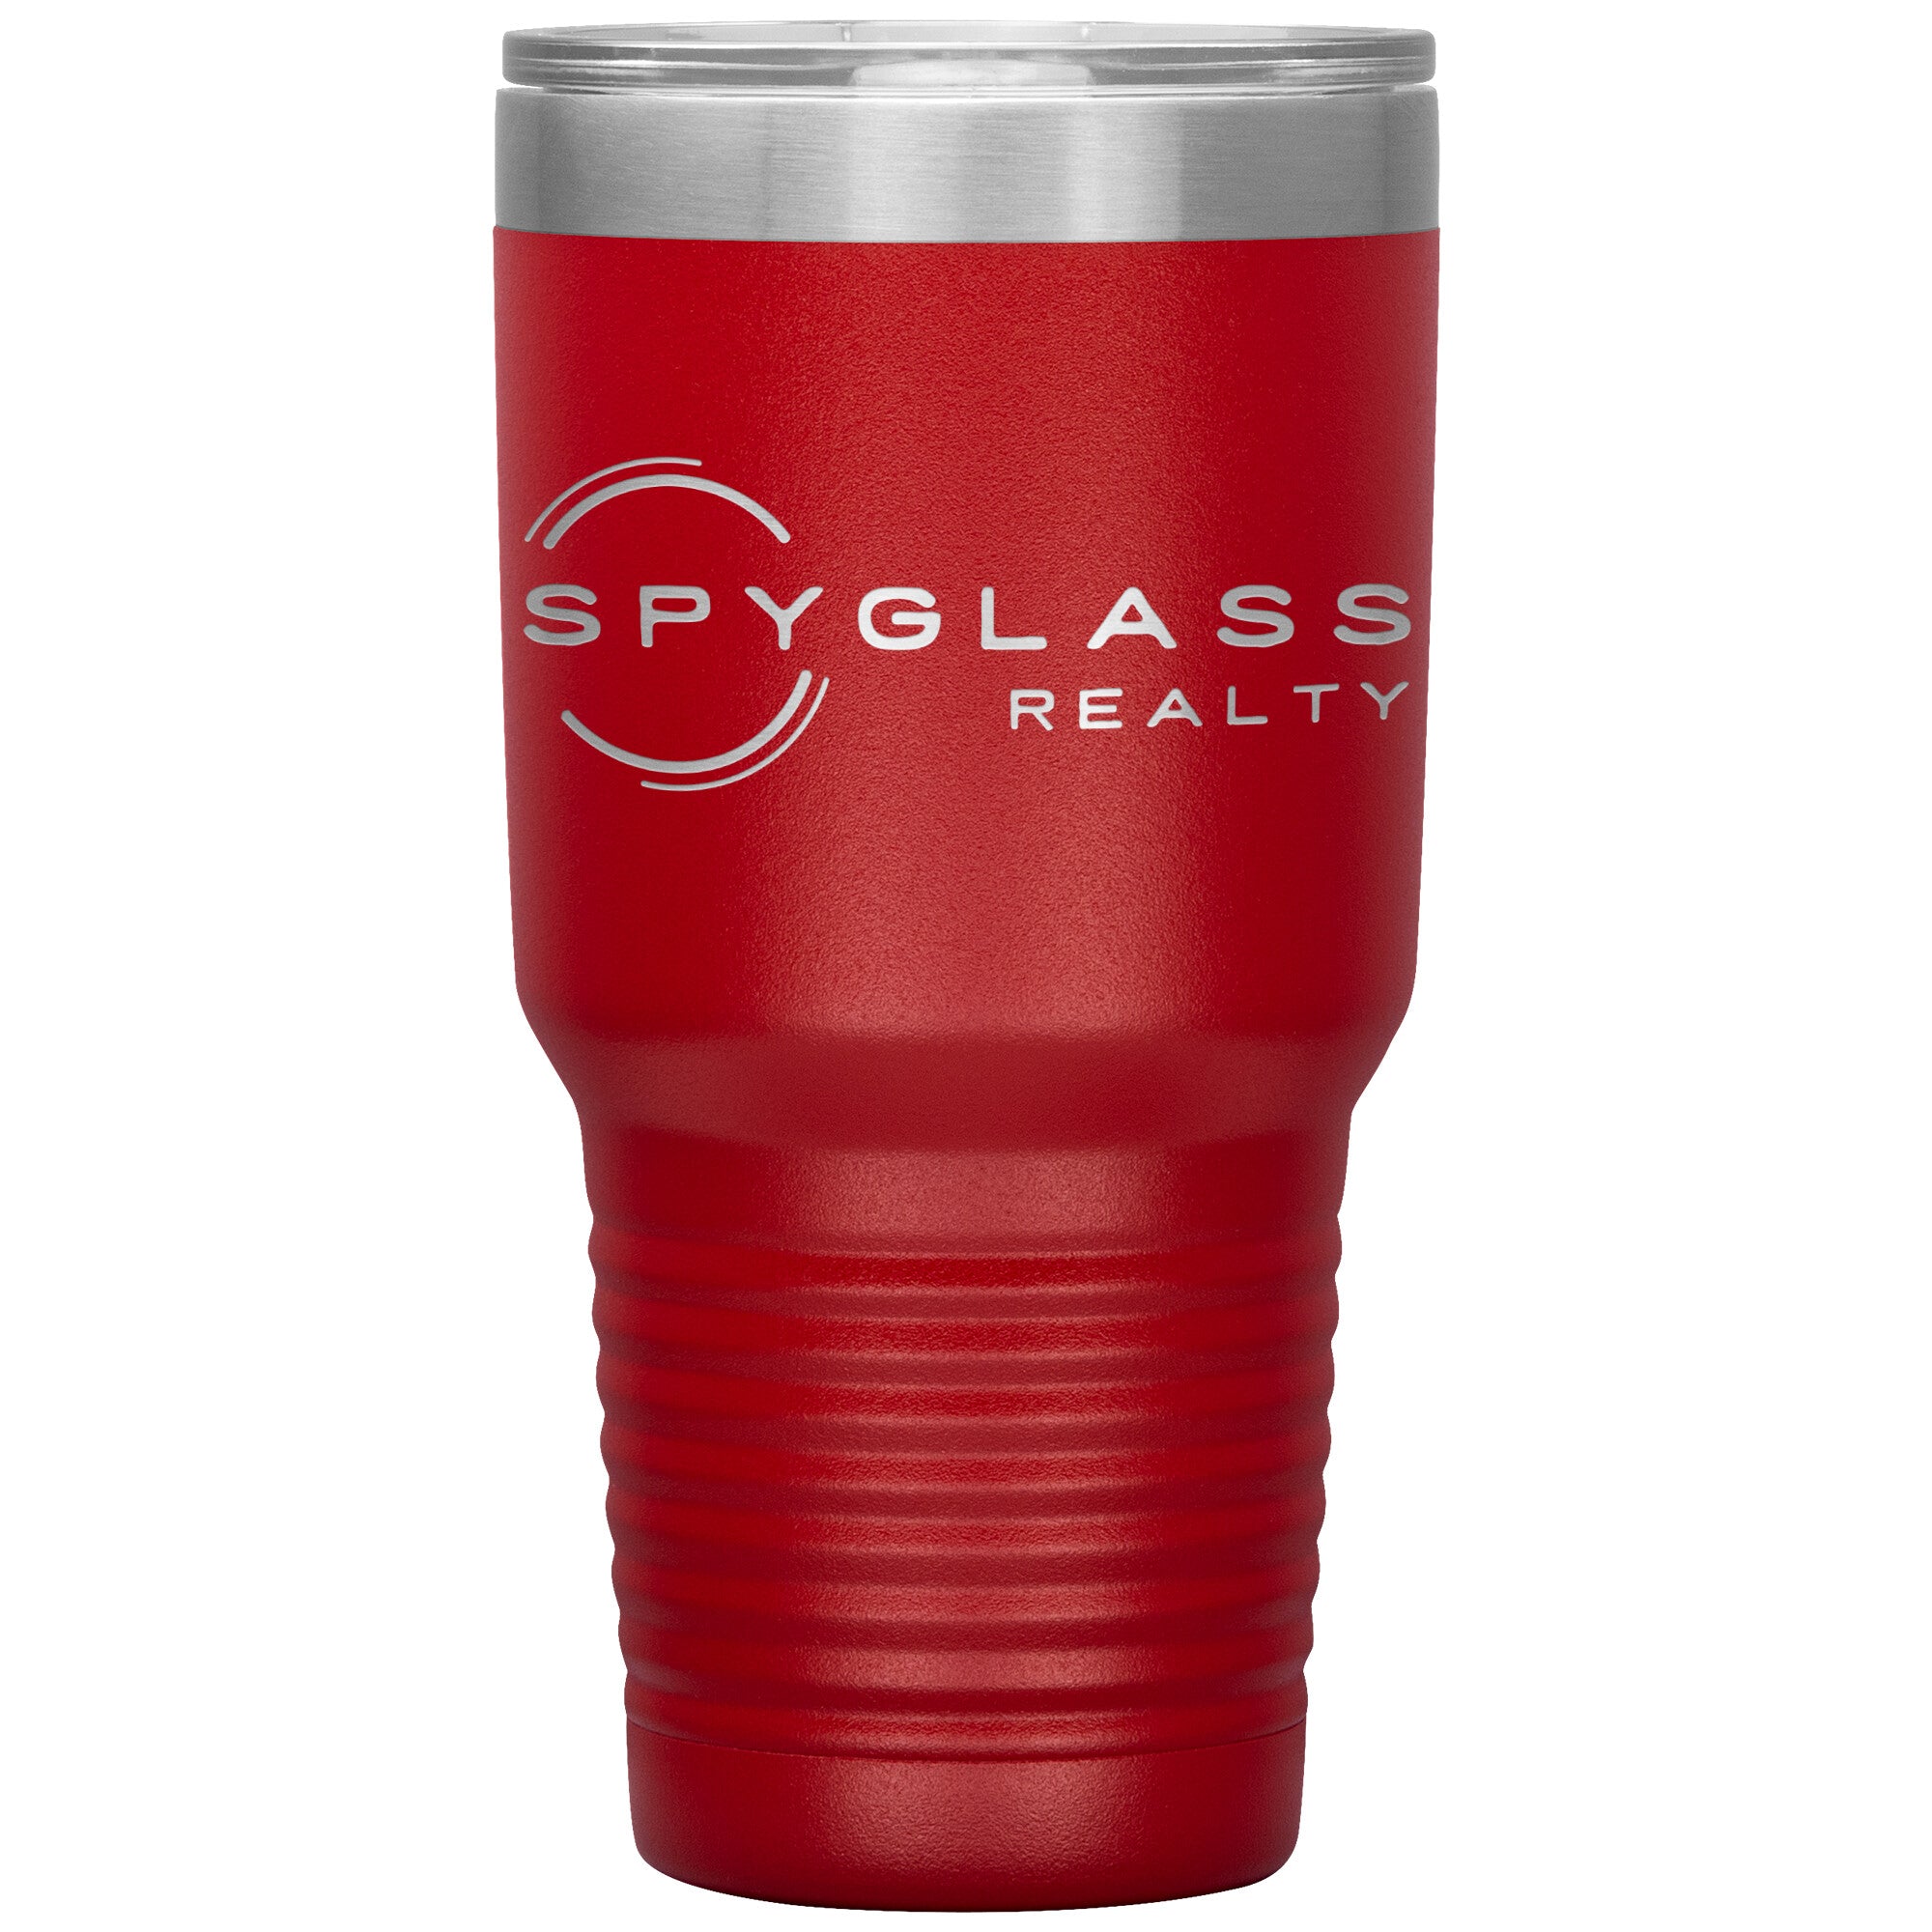 30oz Spyglass Realty Insulated Tumbler